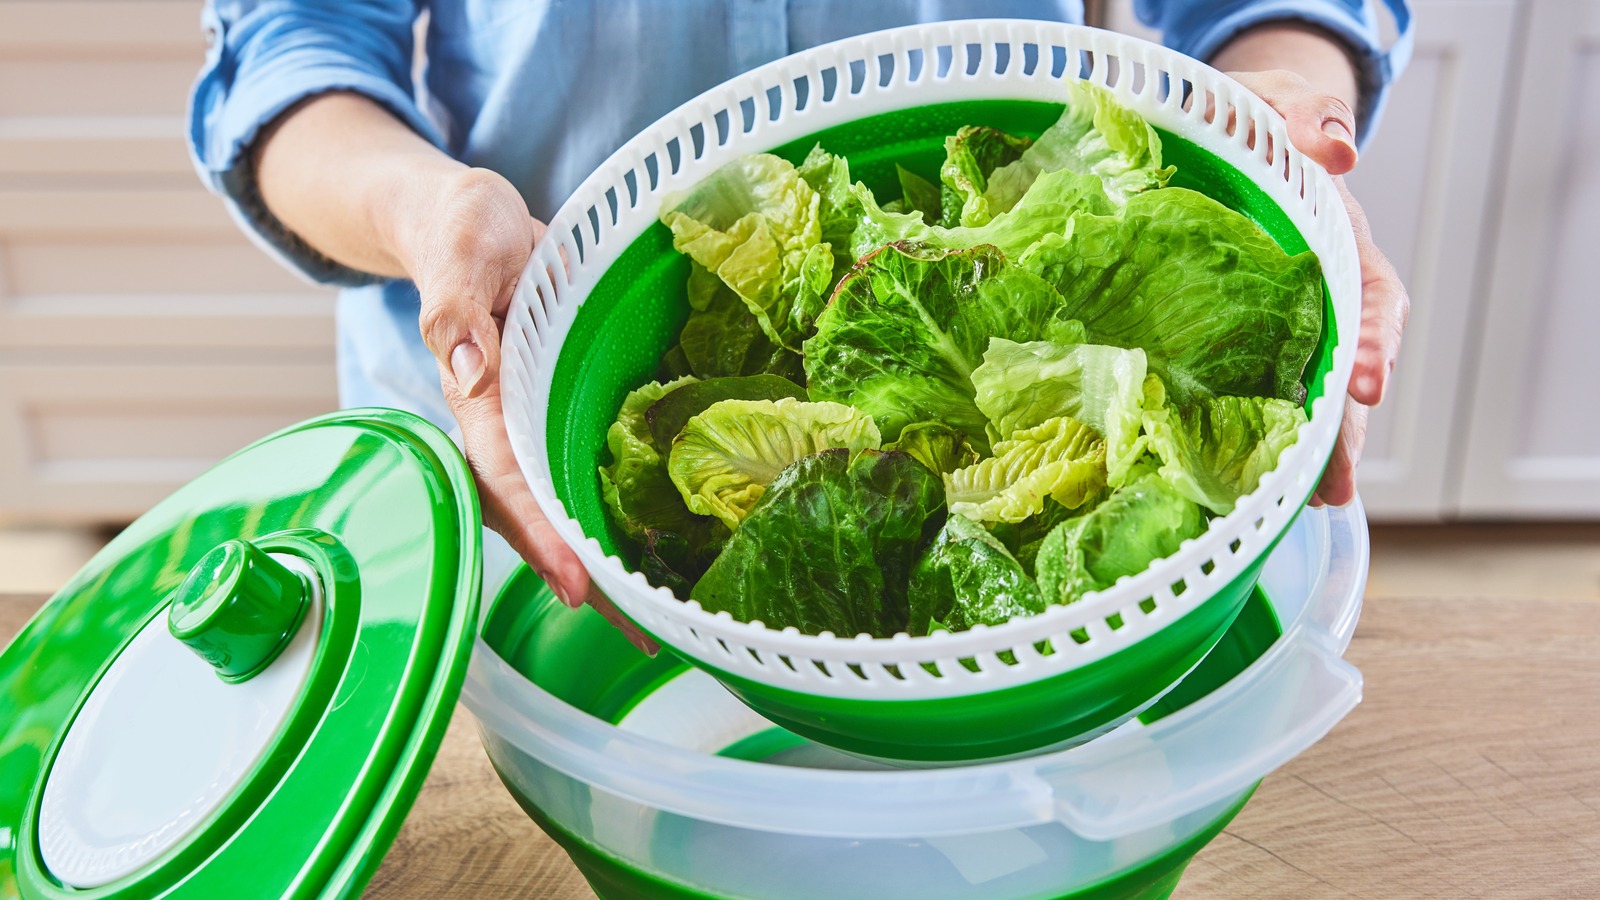 https://www.thedailymeal.com/img/gallery/the-quick-and-painless-way-to-clean-a-salad-spinner/l-intro-1692808936.jpg